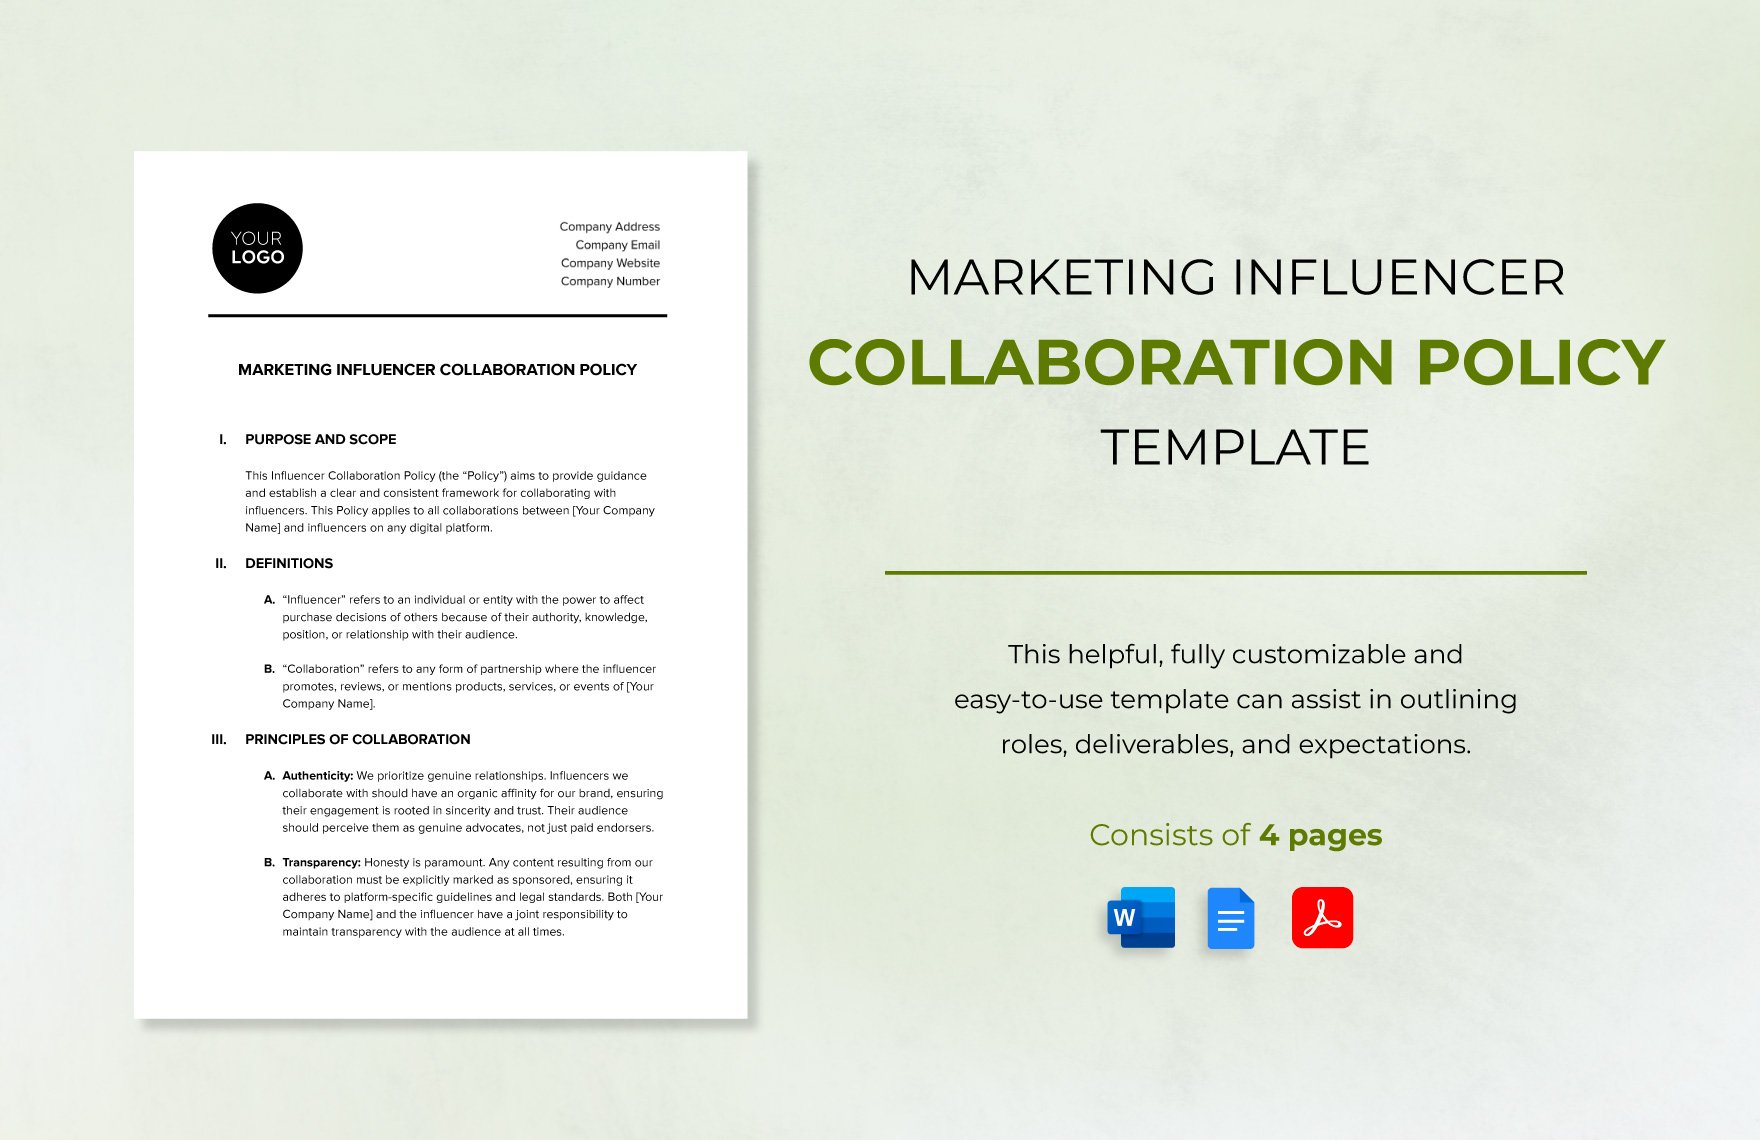 Marketing Influencer Collaboration Policy Template